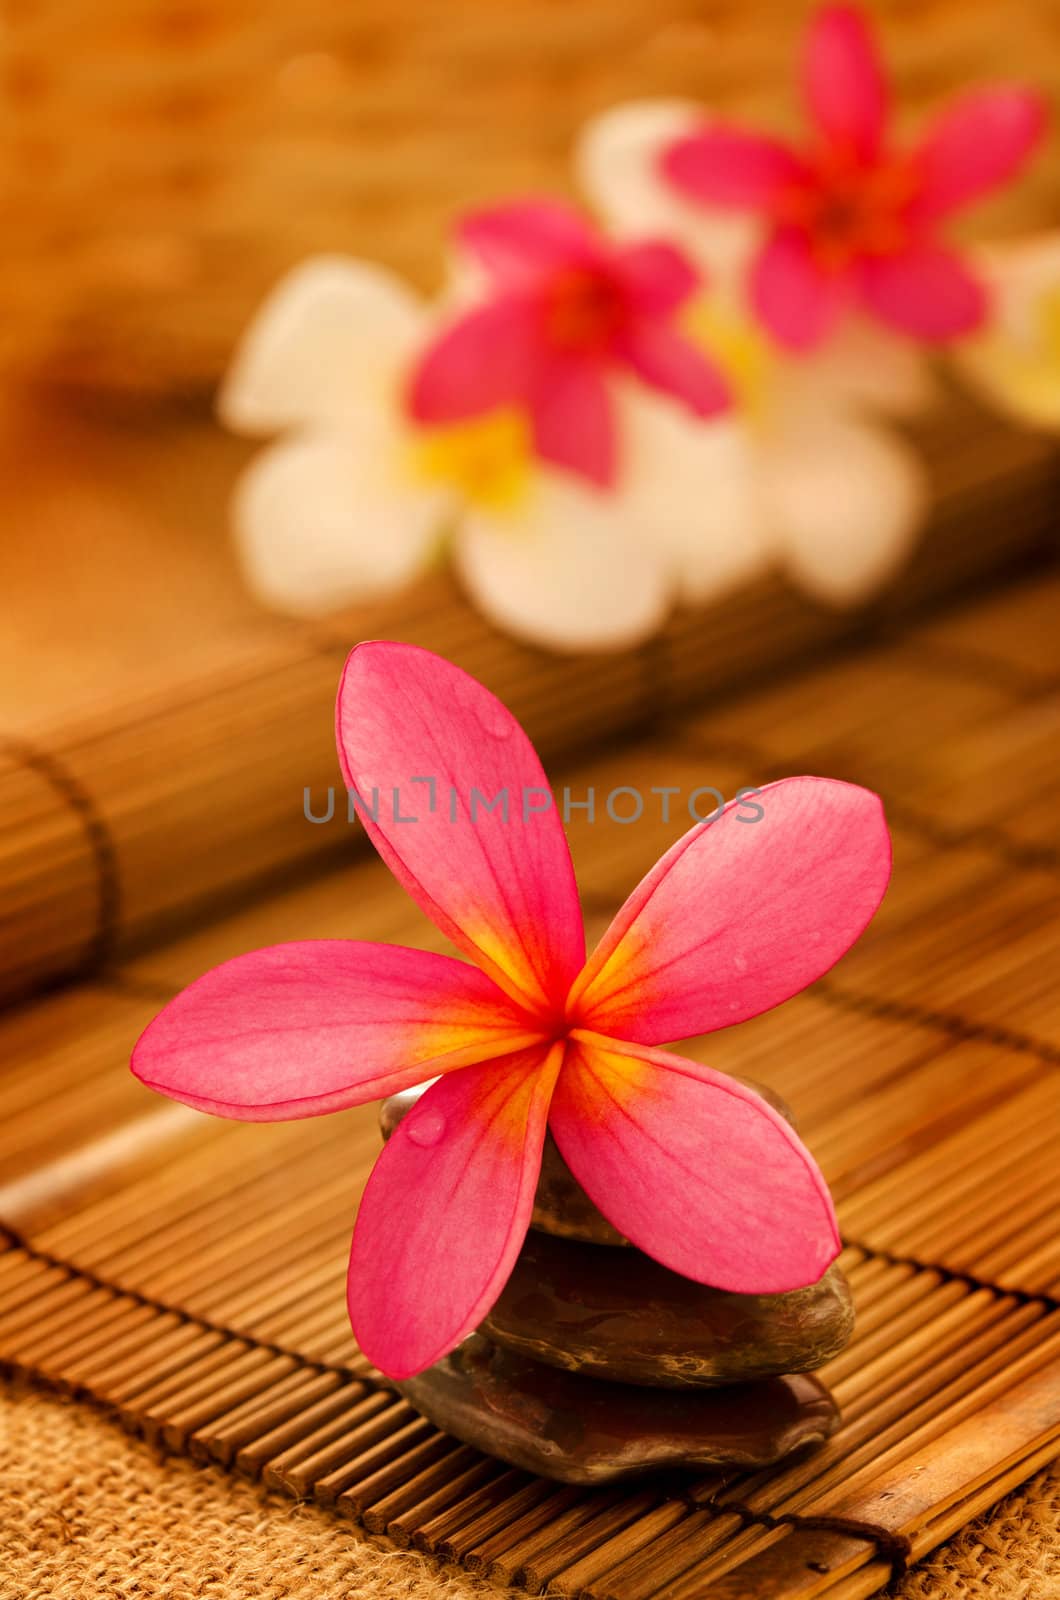 Tropical spa with Frangipani flowers in low lighting, suitable for spa related theme.